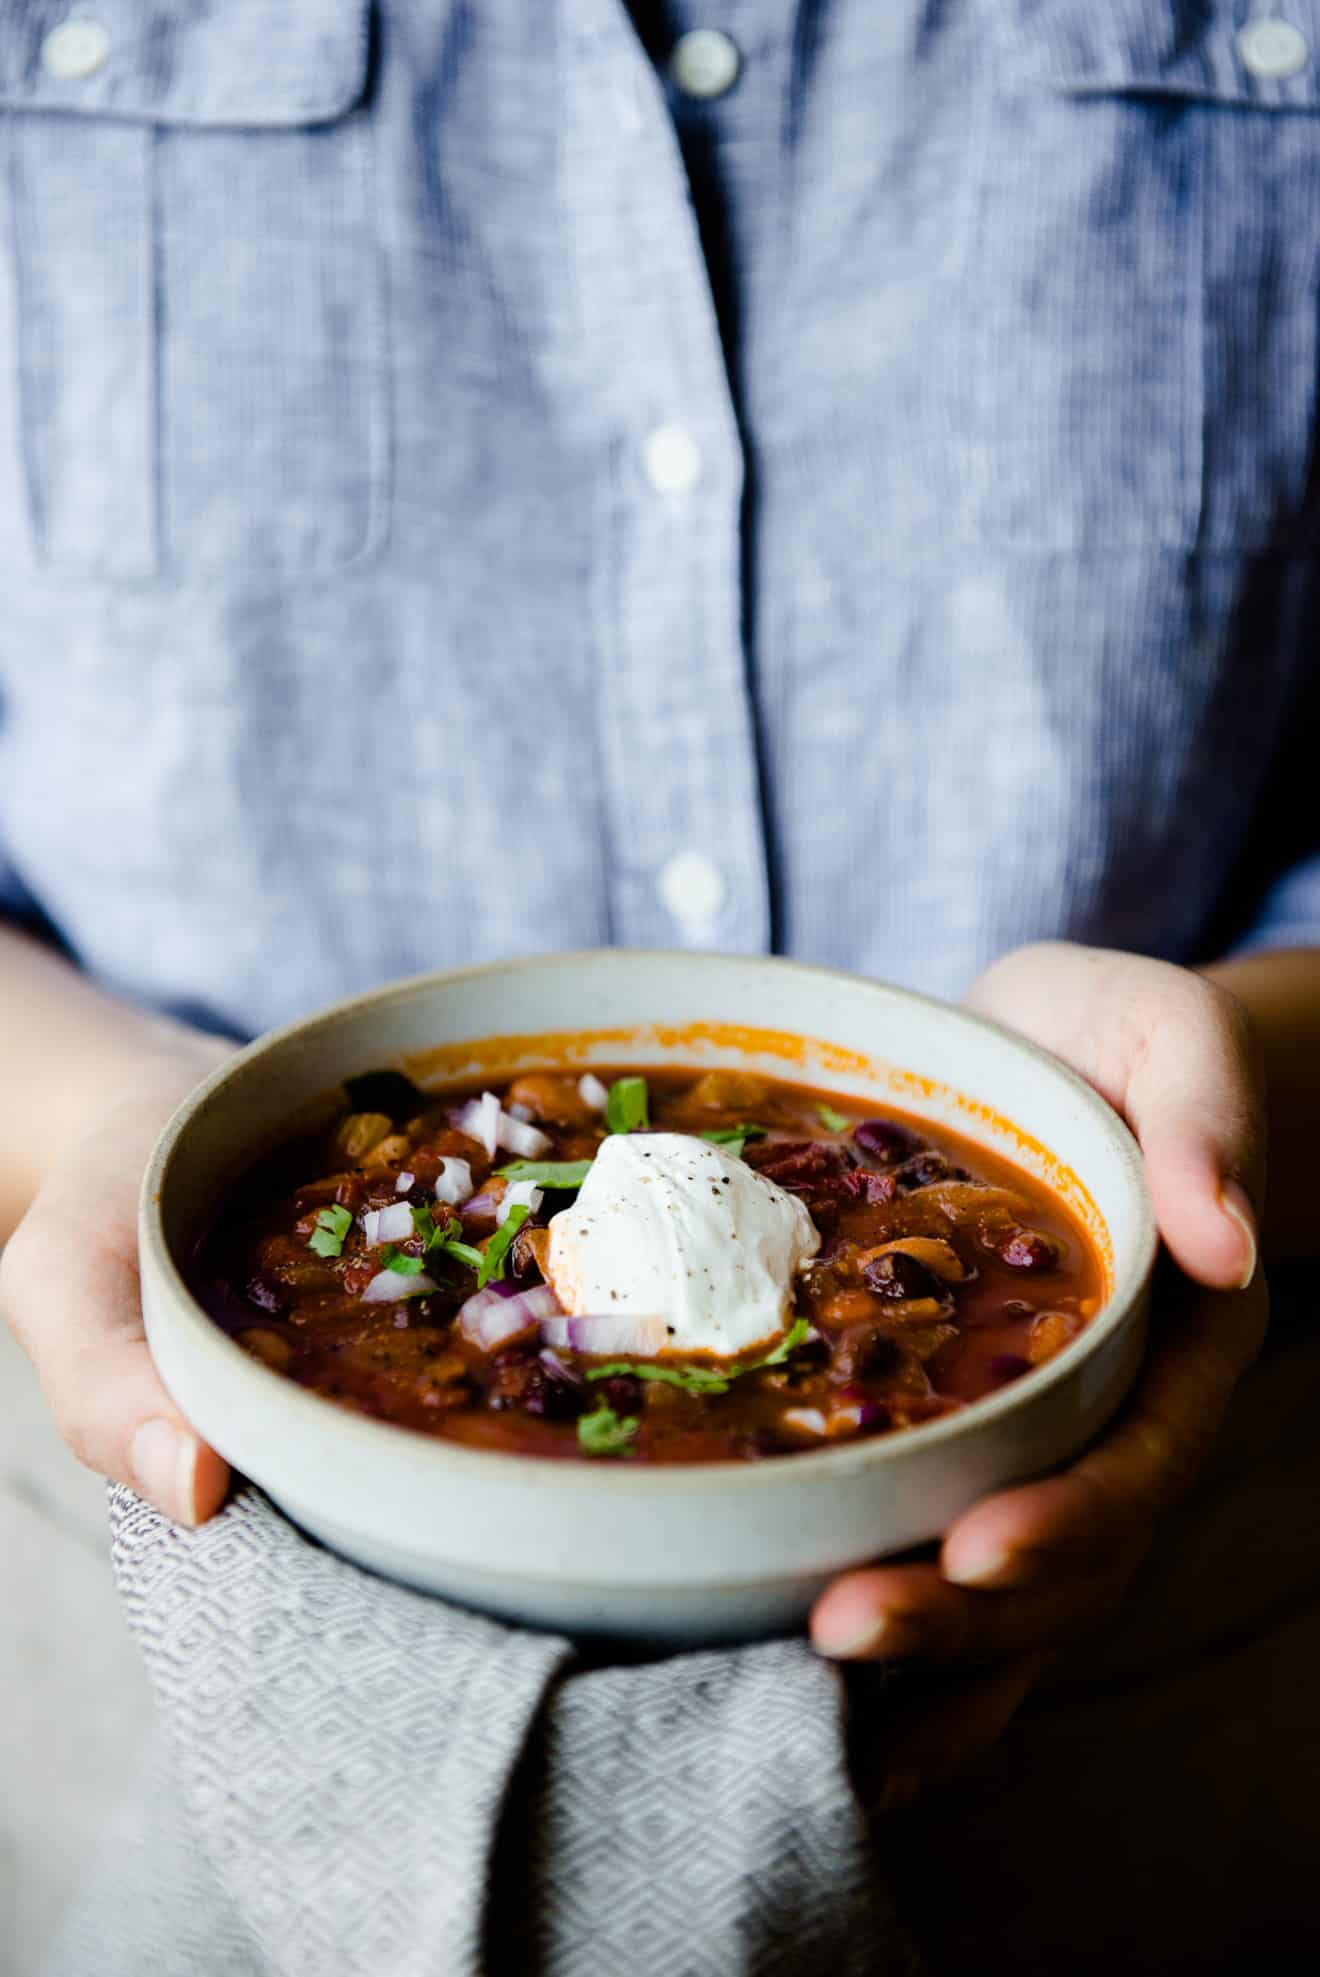 Chipotle Vegetarian Three Bean Chili - an easy and filling one-pot meal that is packed with protein!